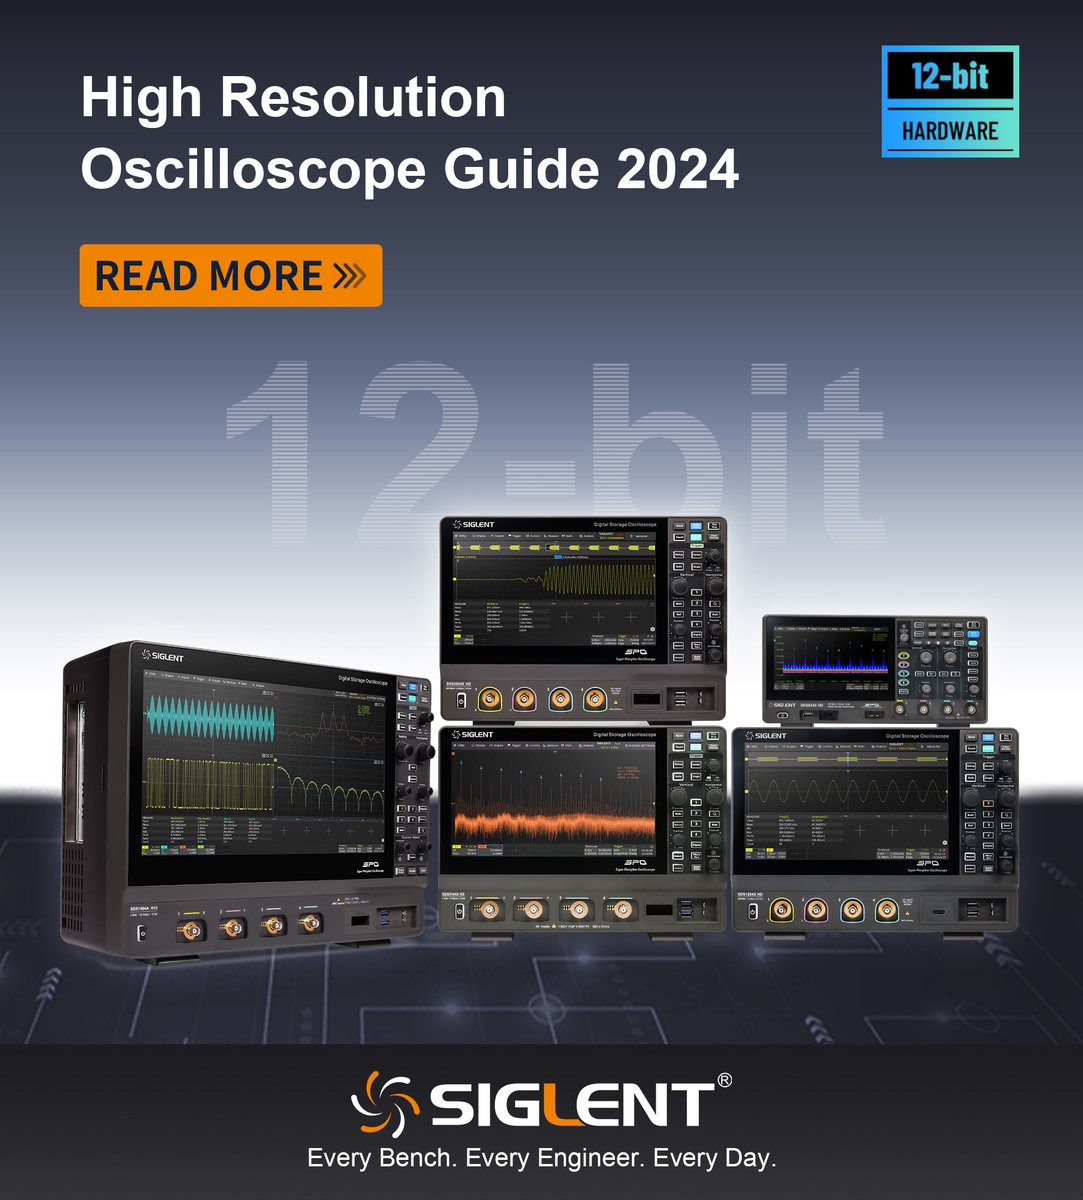 From 70 MHz to 4 GHz, Siglent’s high-resolution oscilloscopes now offer superior signal fidelity for a wide range of applications such as power, EMI, frequency analysis, embedded design, and failure analysis. Explore our scopes for every bench: bit.ly/4azO0gv